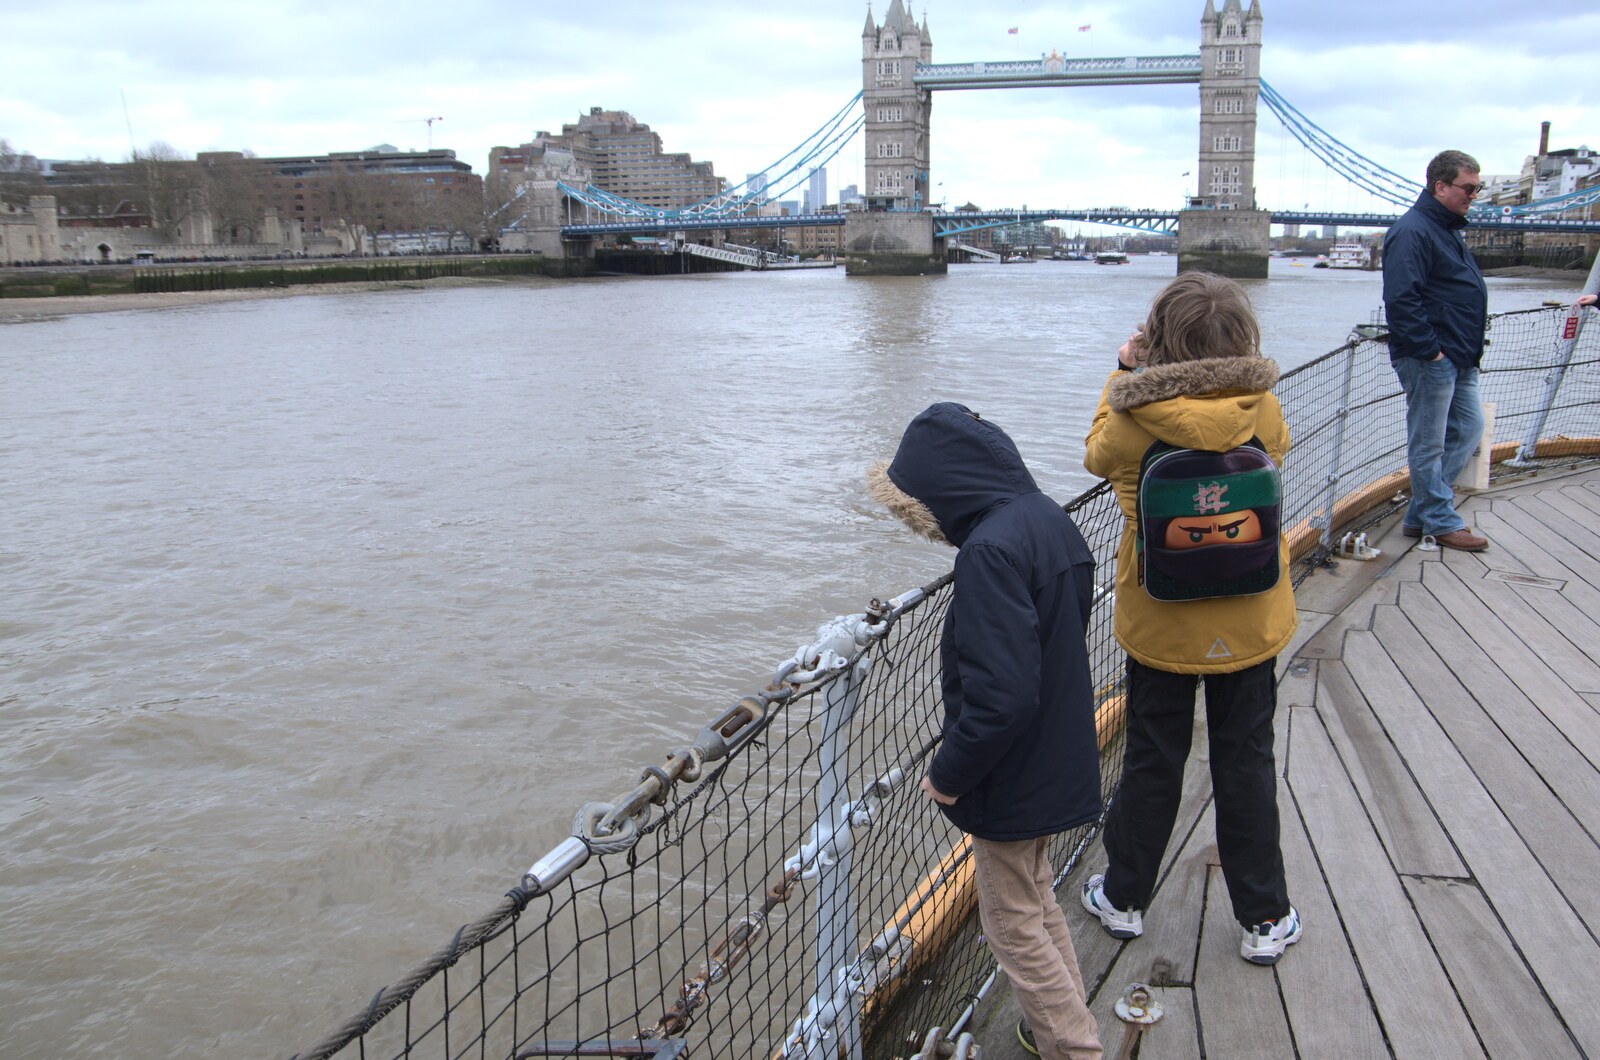 Harry peers into the Thames from HMS Belfast and the South Bank, Southwark, London - 17th February 2020